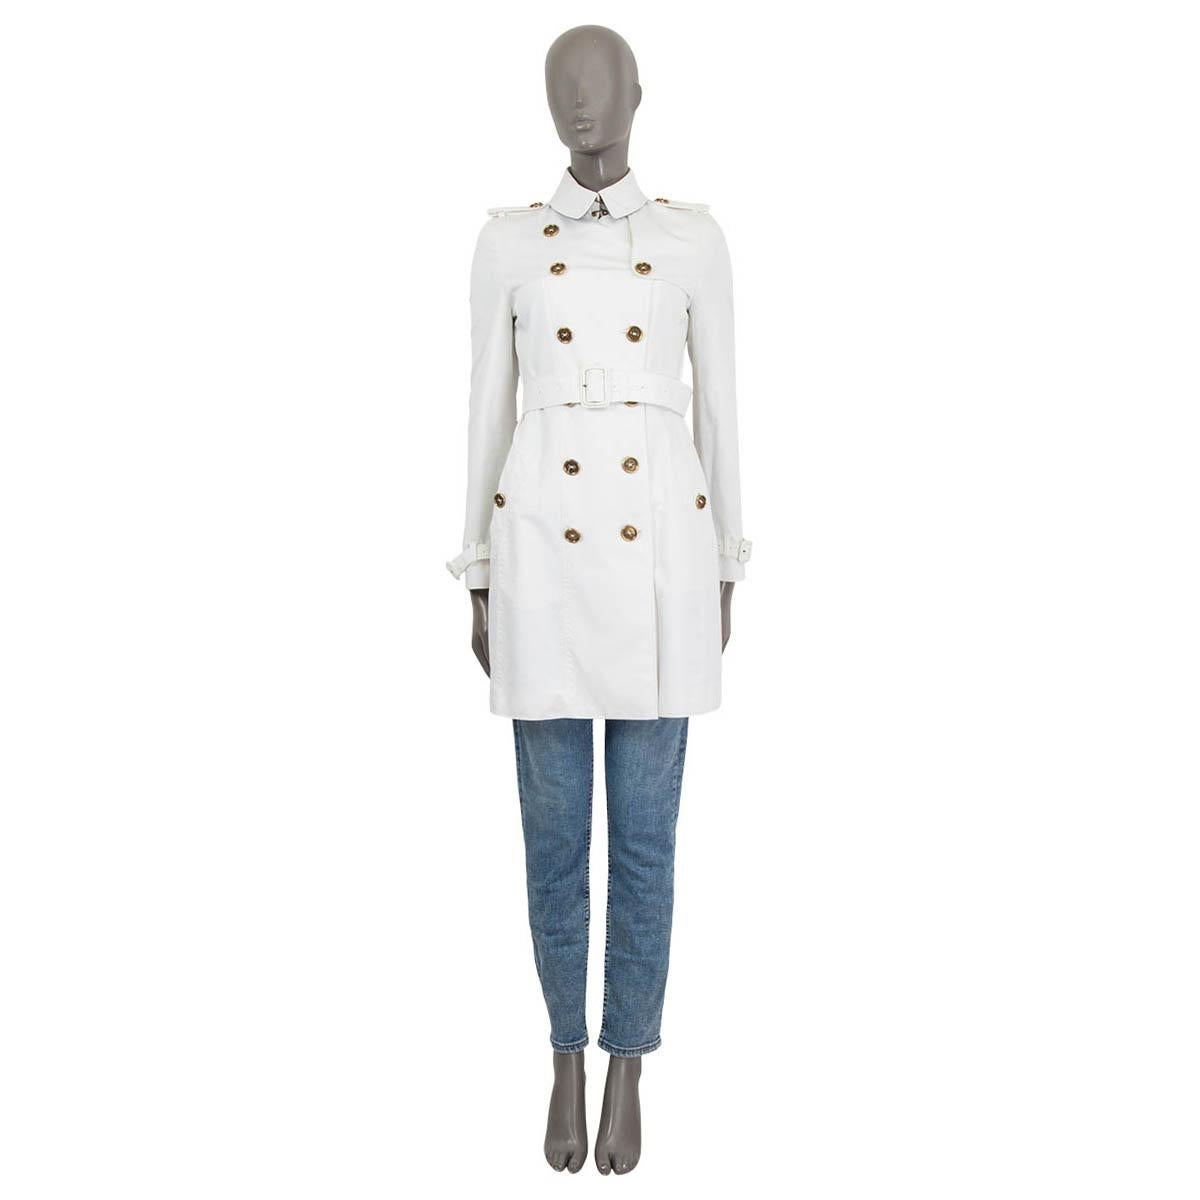 100% authentic Burberry London double-breasted short trench coat in white cotton (98%) and elastane (2%) with belted cuffs and shoulder epaulettes. Closes with one hook at the neck, six buttons on the front and a detachable belt at the waist-line.